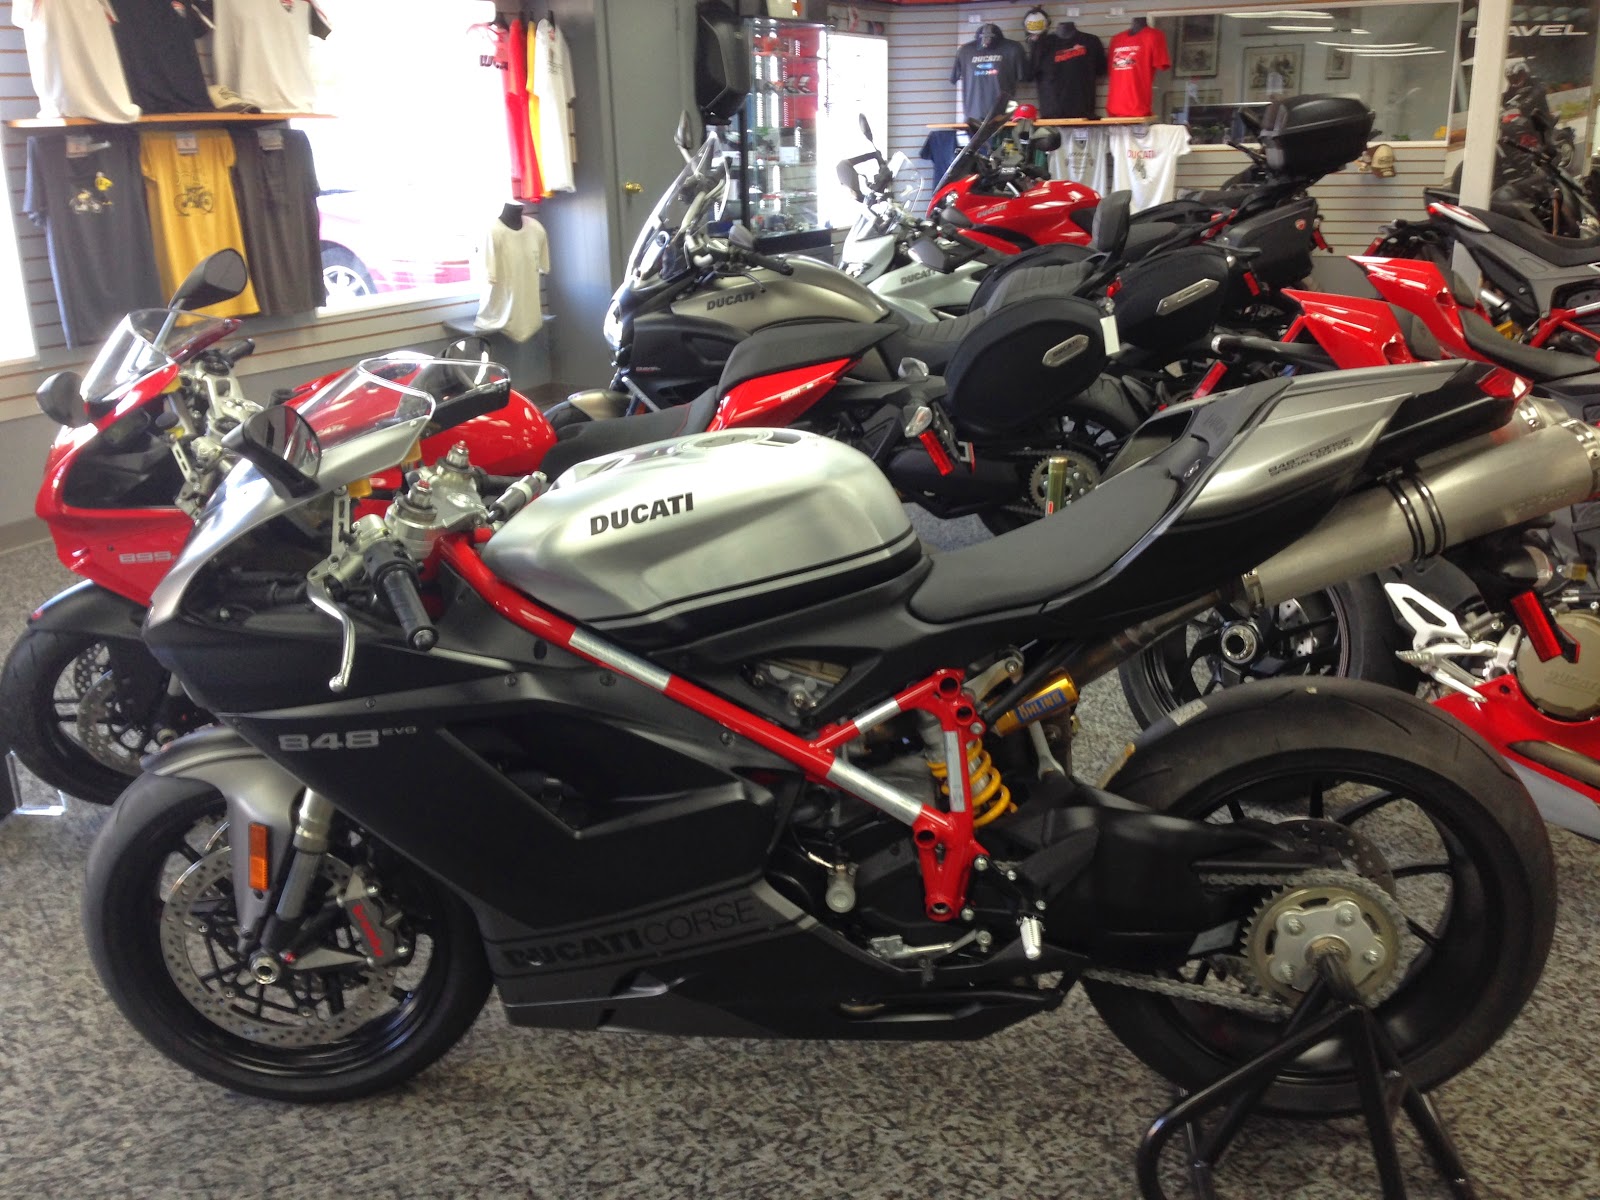 Ducati 848 Corse Superbike at Koups Cycle Shop by NYDucati | 899Adventures.com